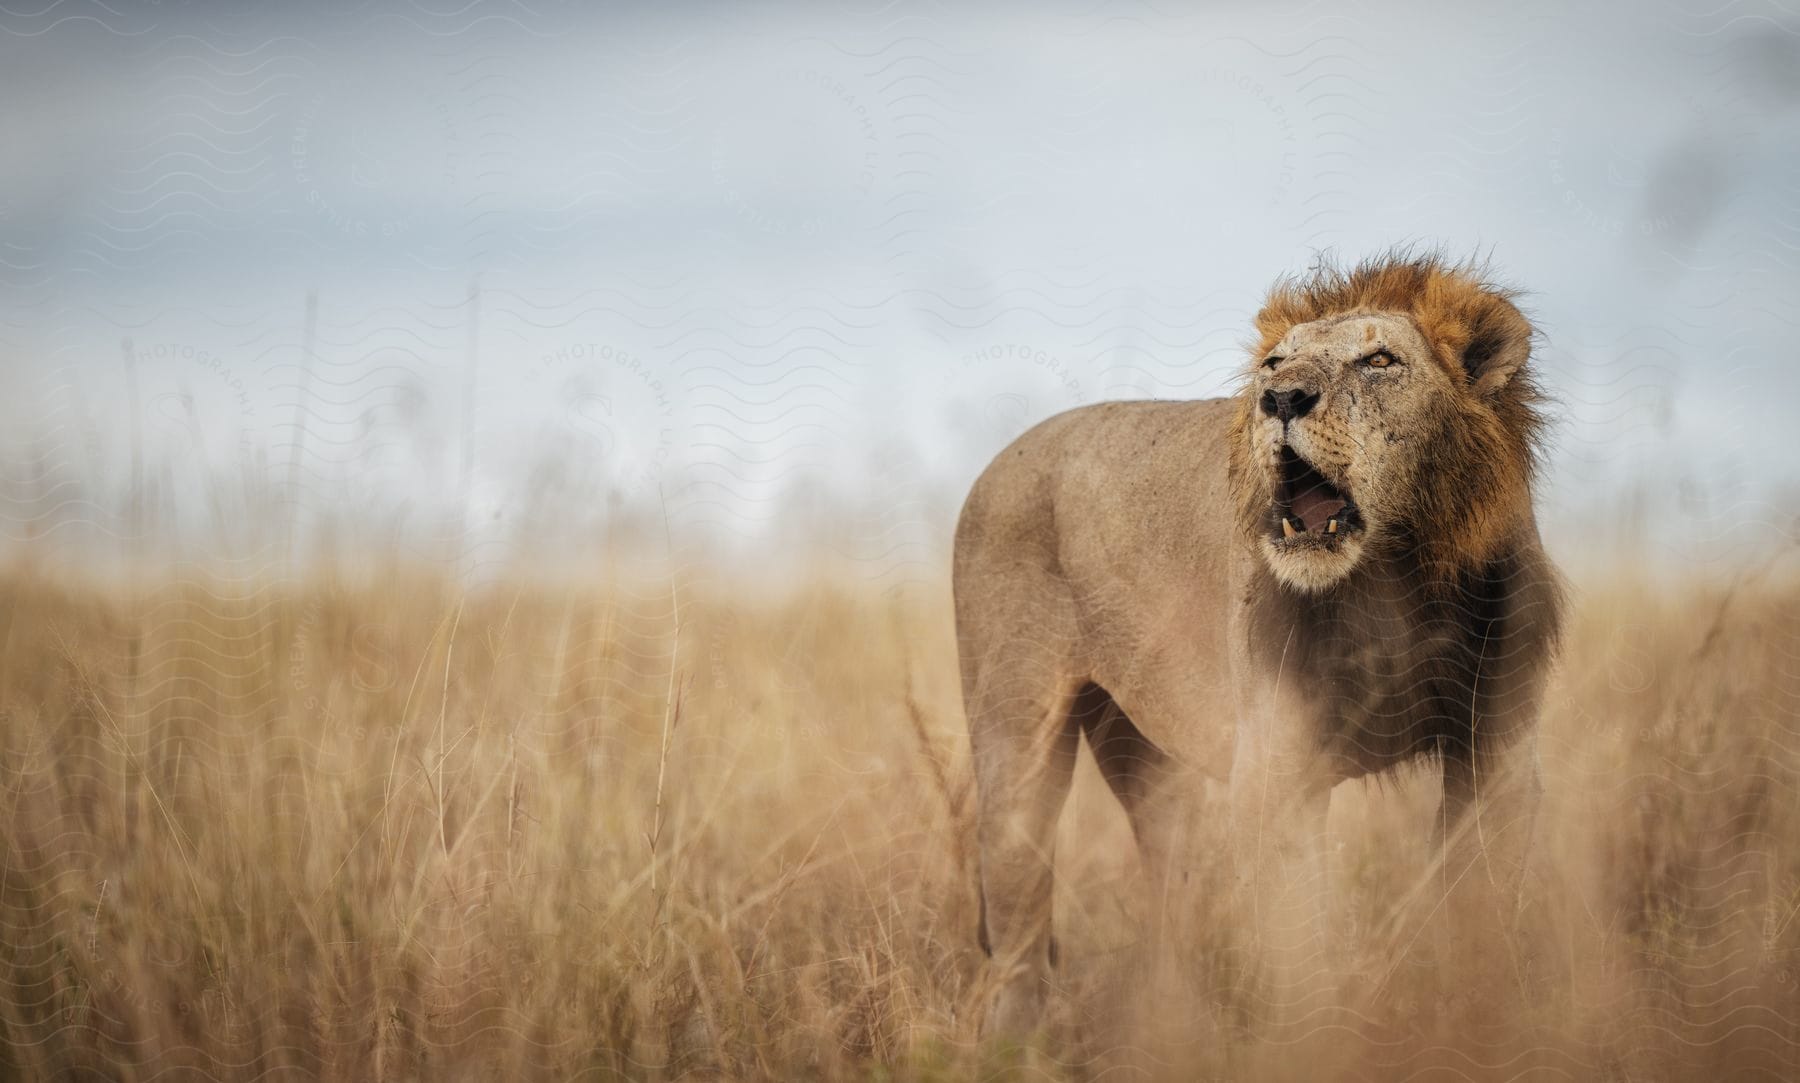 Stock photo of a lion roaring while standing in a grassland